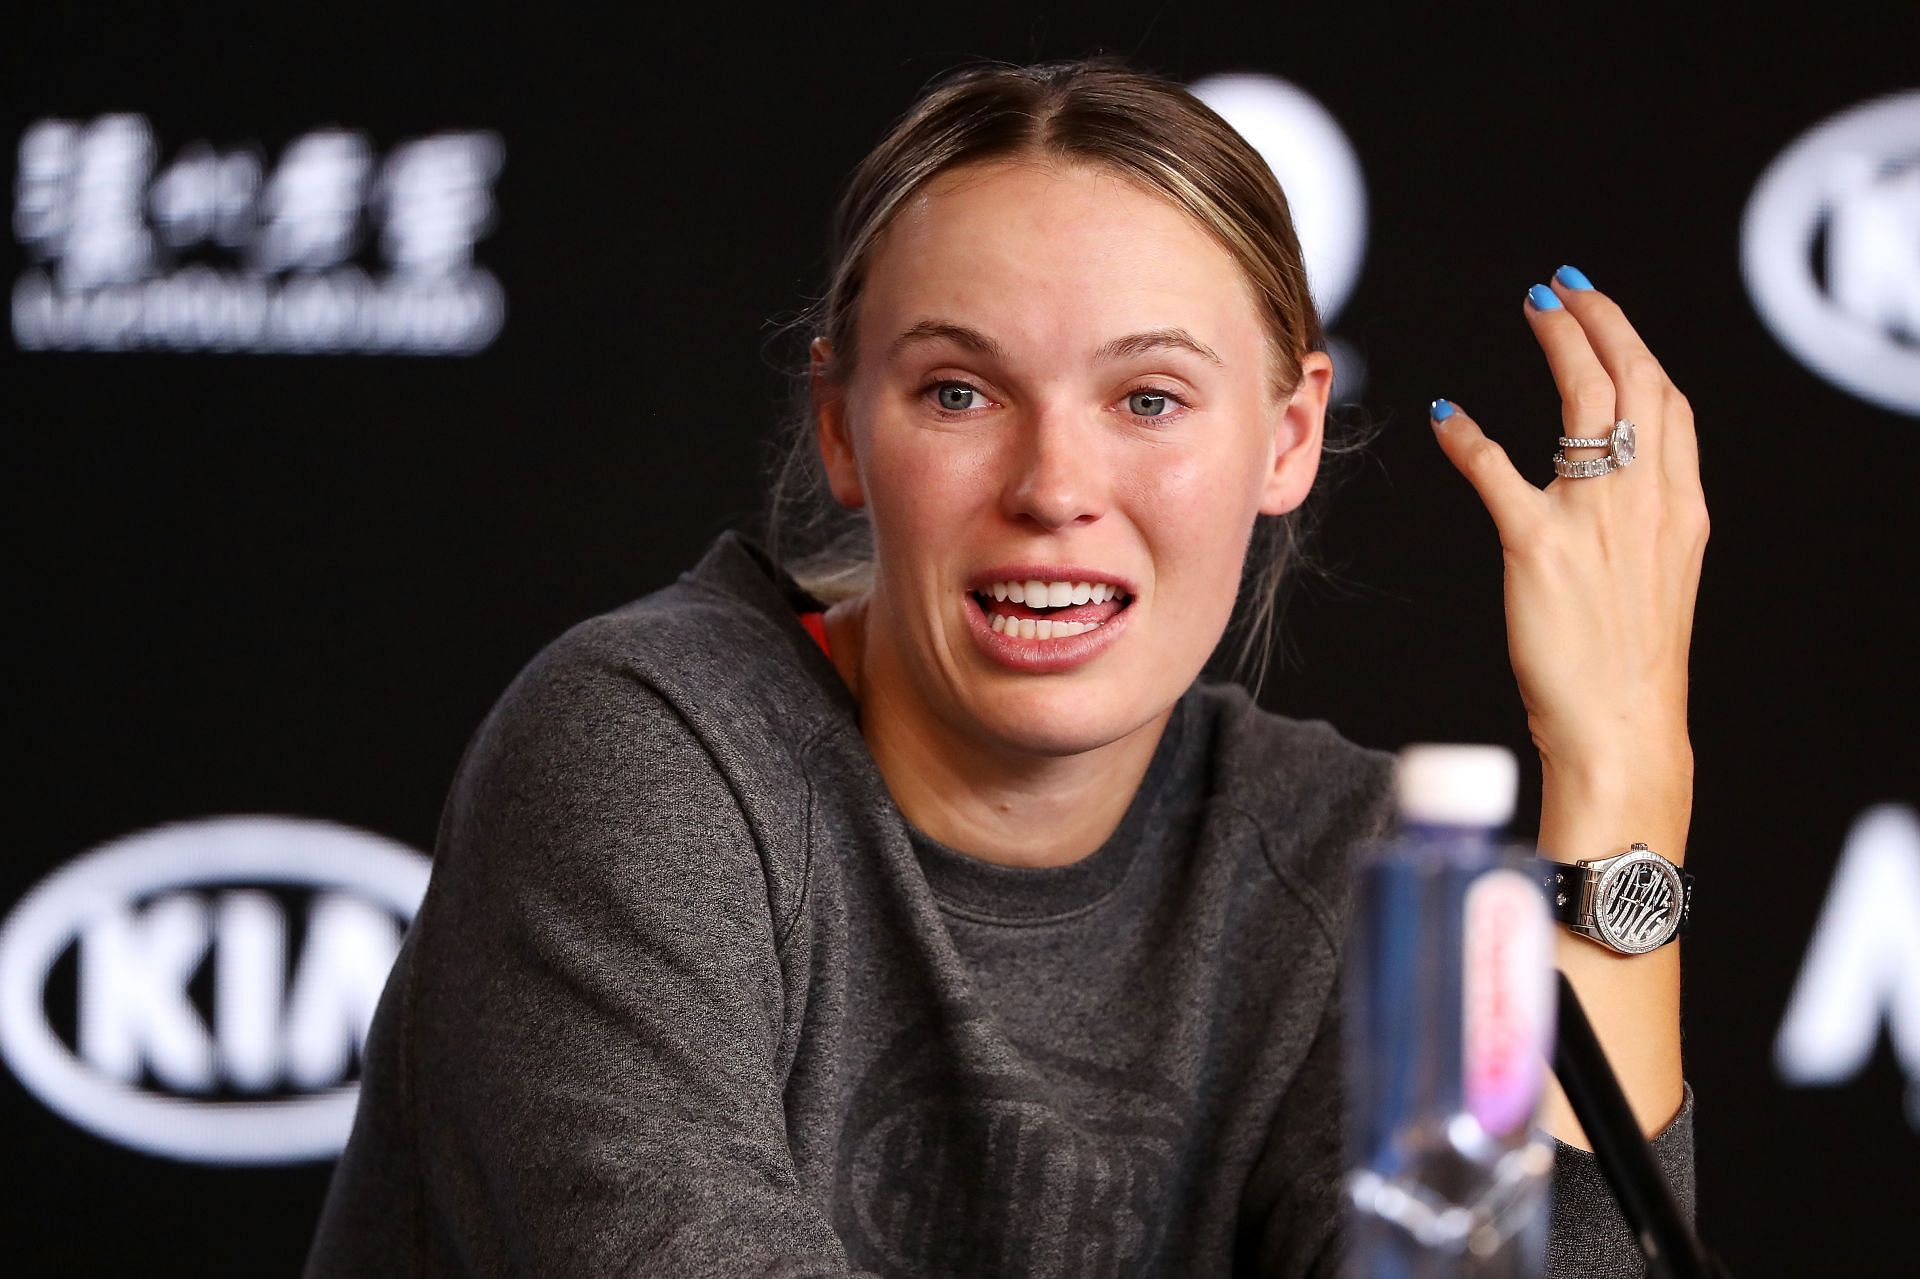 Caroline Wozniacki pictured during a press conference.